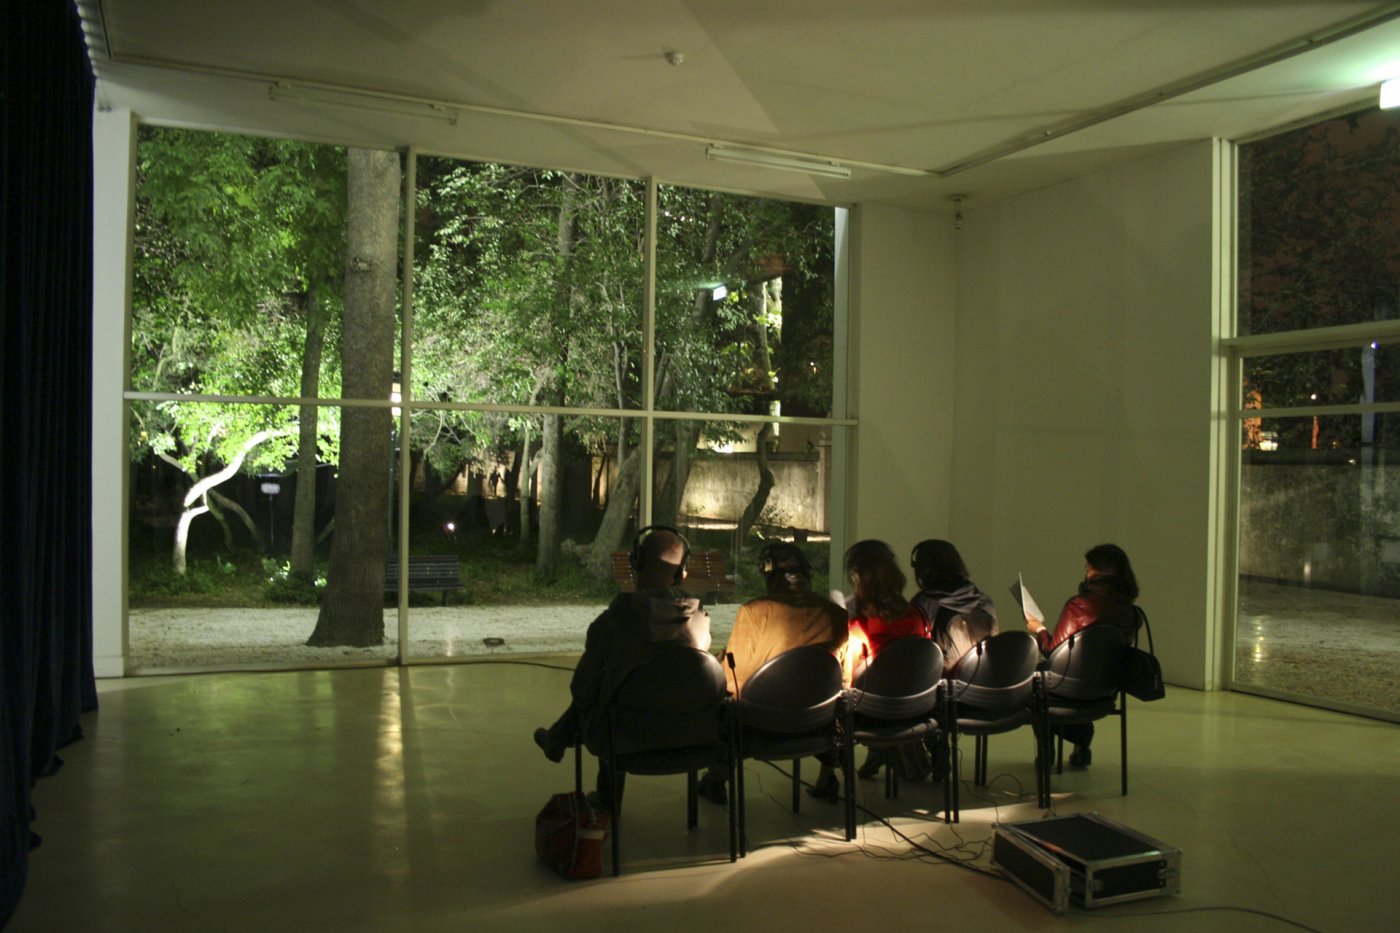 Nuno da Luz, 360 horas, 2009. Stereo microphone outside the space, cables, digital recorder, headphone amplifier, headphones, felt curtain, chairs, reading lamps, photocopy on paper. Dimensions and duration variable. Exhibition view: O Sol morre cedo, Pavilhão Branco – Museu da Cidade, Lisbon
